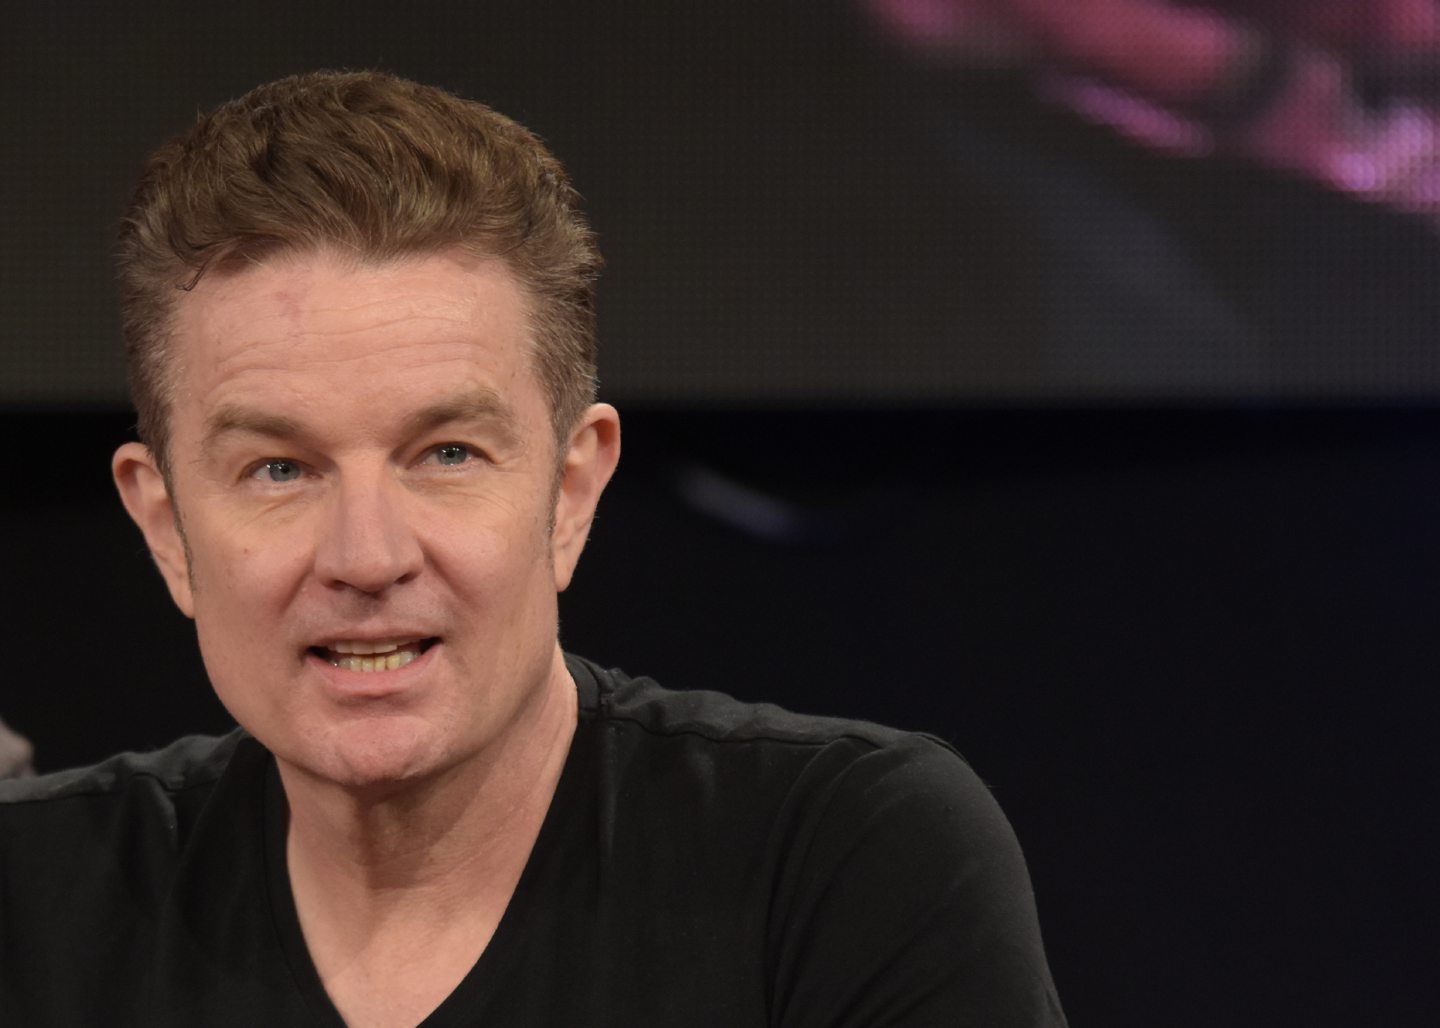 Buffy the Vampire Slayer actor James Marsters will be at Comic Con in Aberdeen